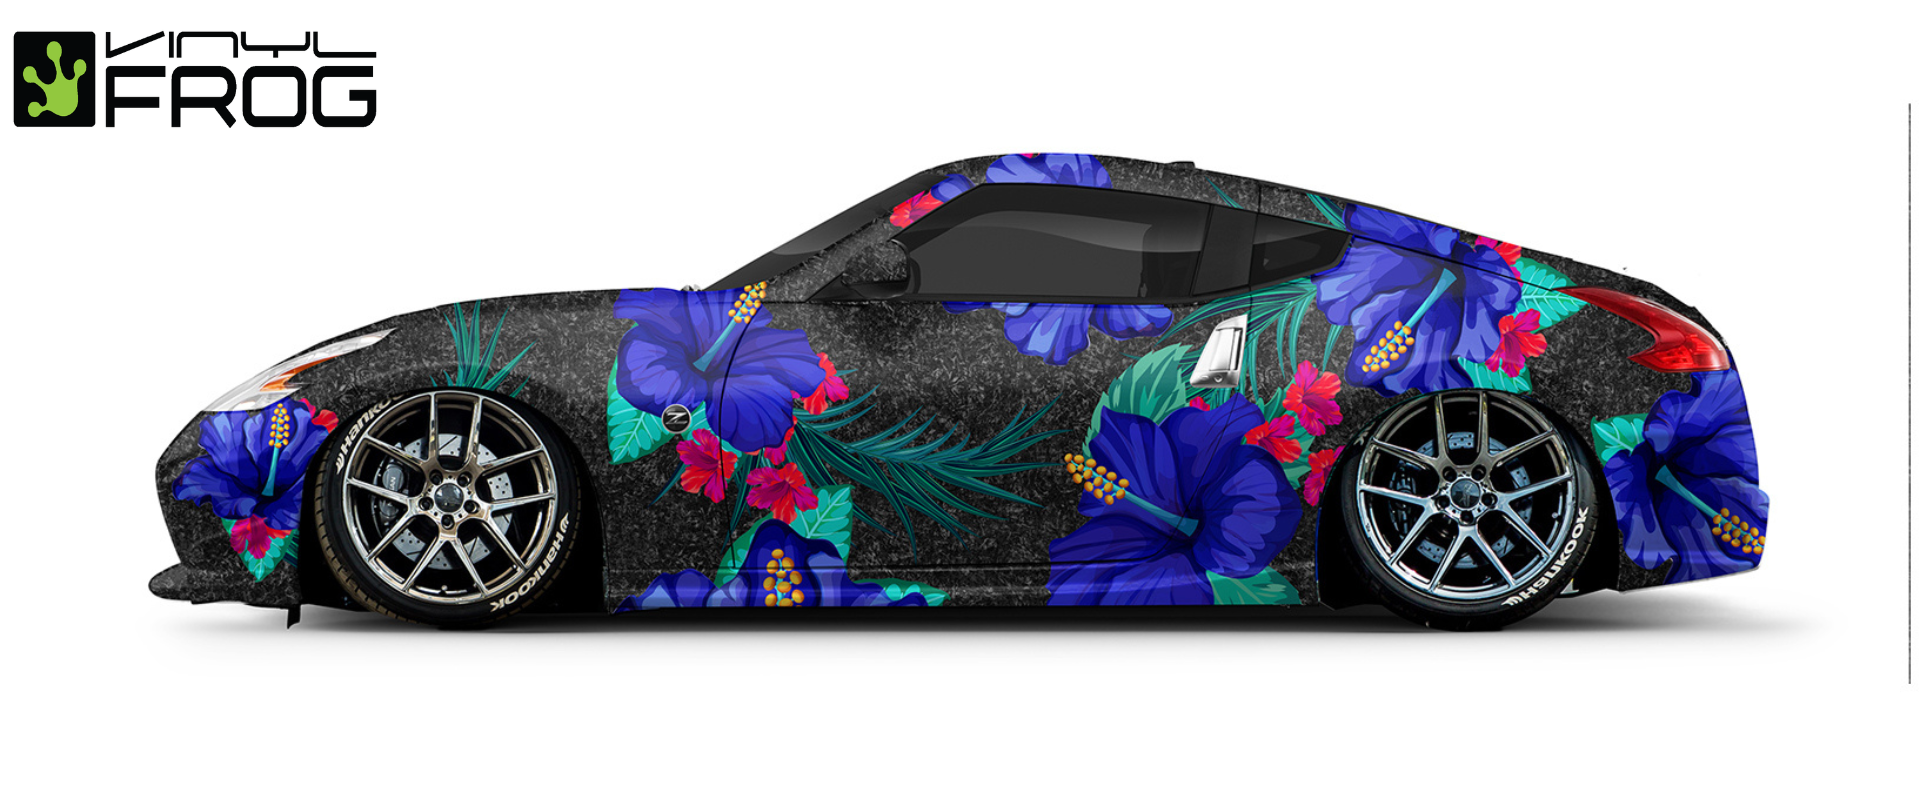 Car Wrapping Is the Flexible Way to Decorate Your Car  eBay Motors Blog